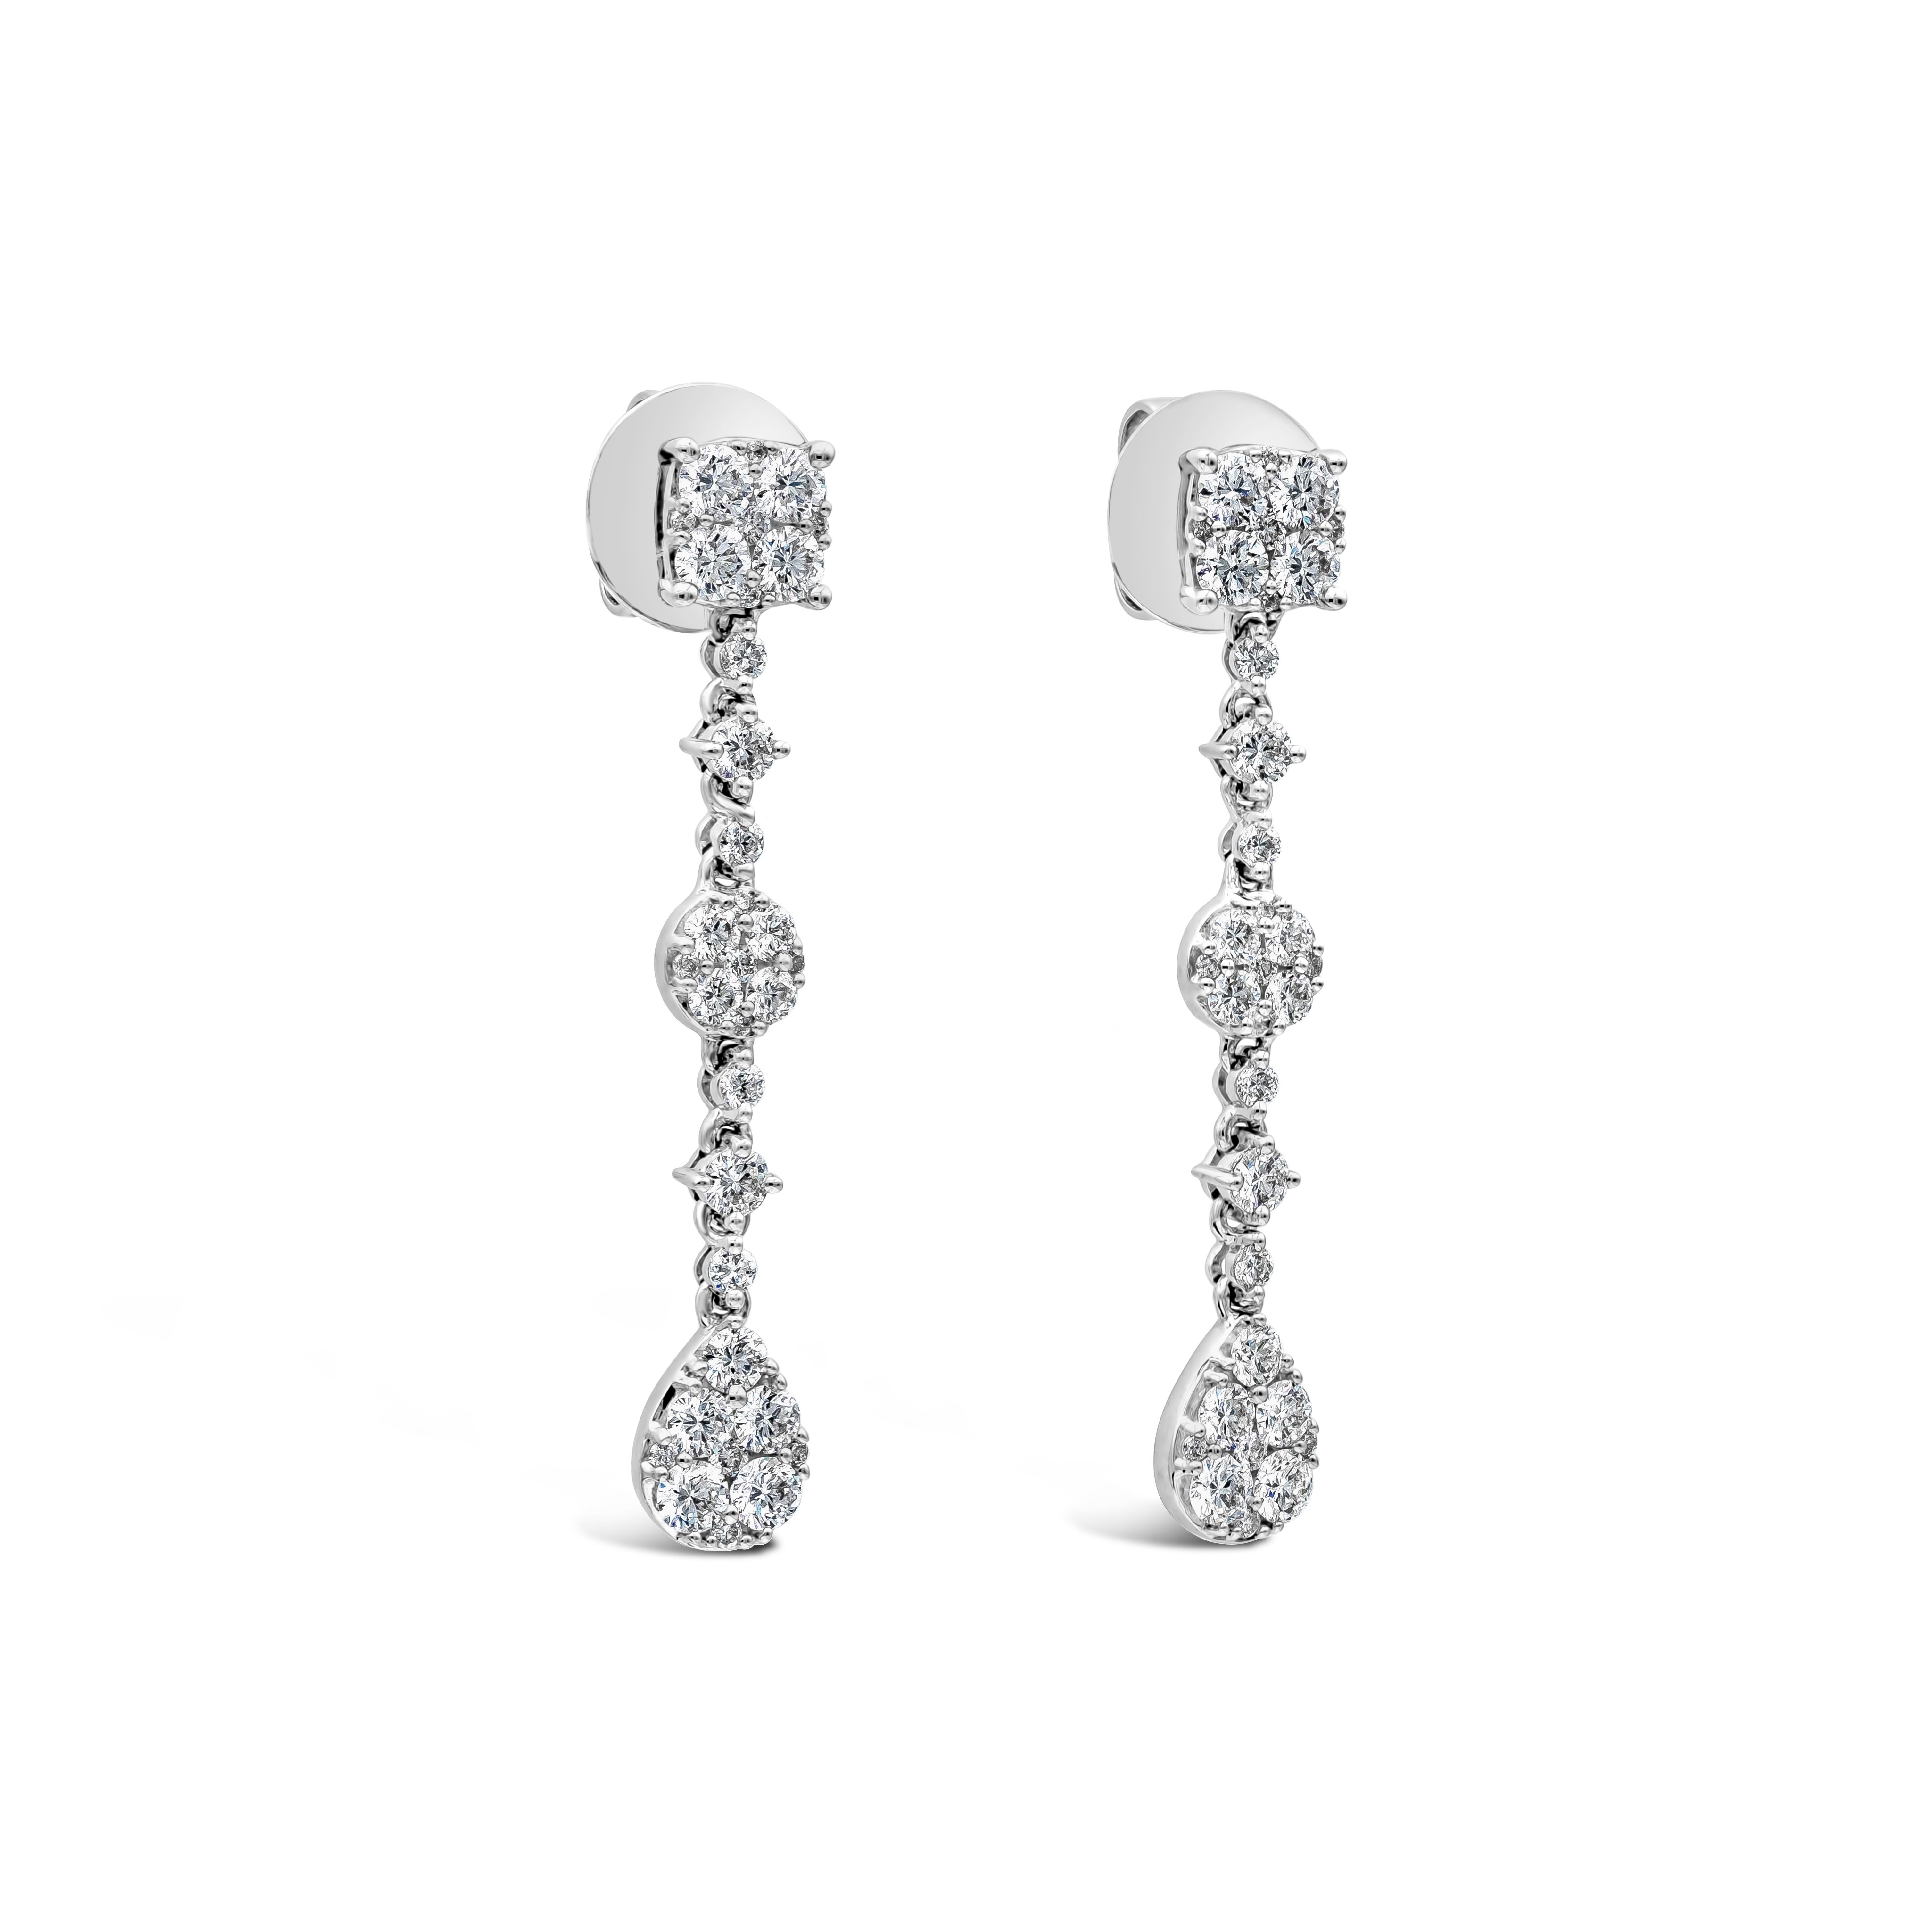 This classy pair of drop earrings showcasing a clusters of 66 brilliant round diamonds set in a cushion, round, and pear shape mountings, arranged in an elegant drop spaced by round diamonds. The weight of the diamonds is 1.78 carats in total. Made